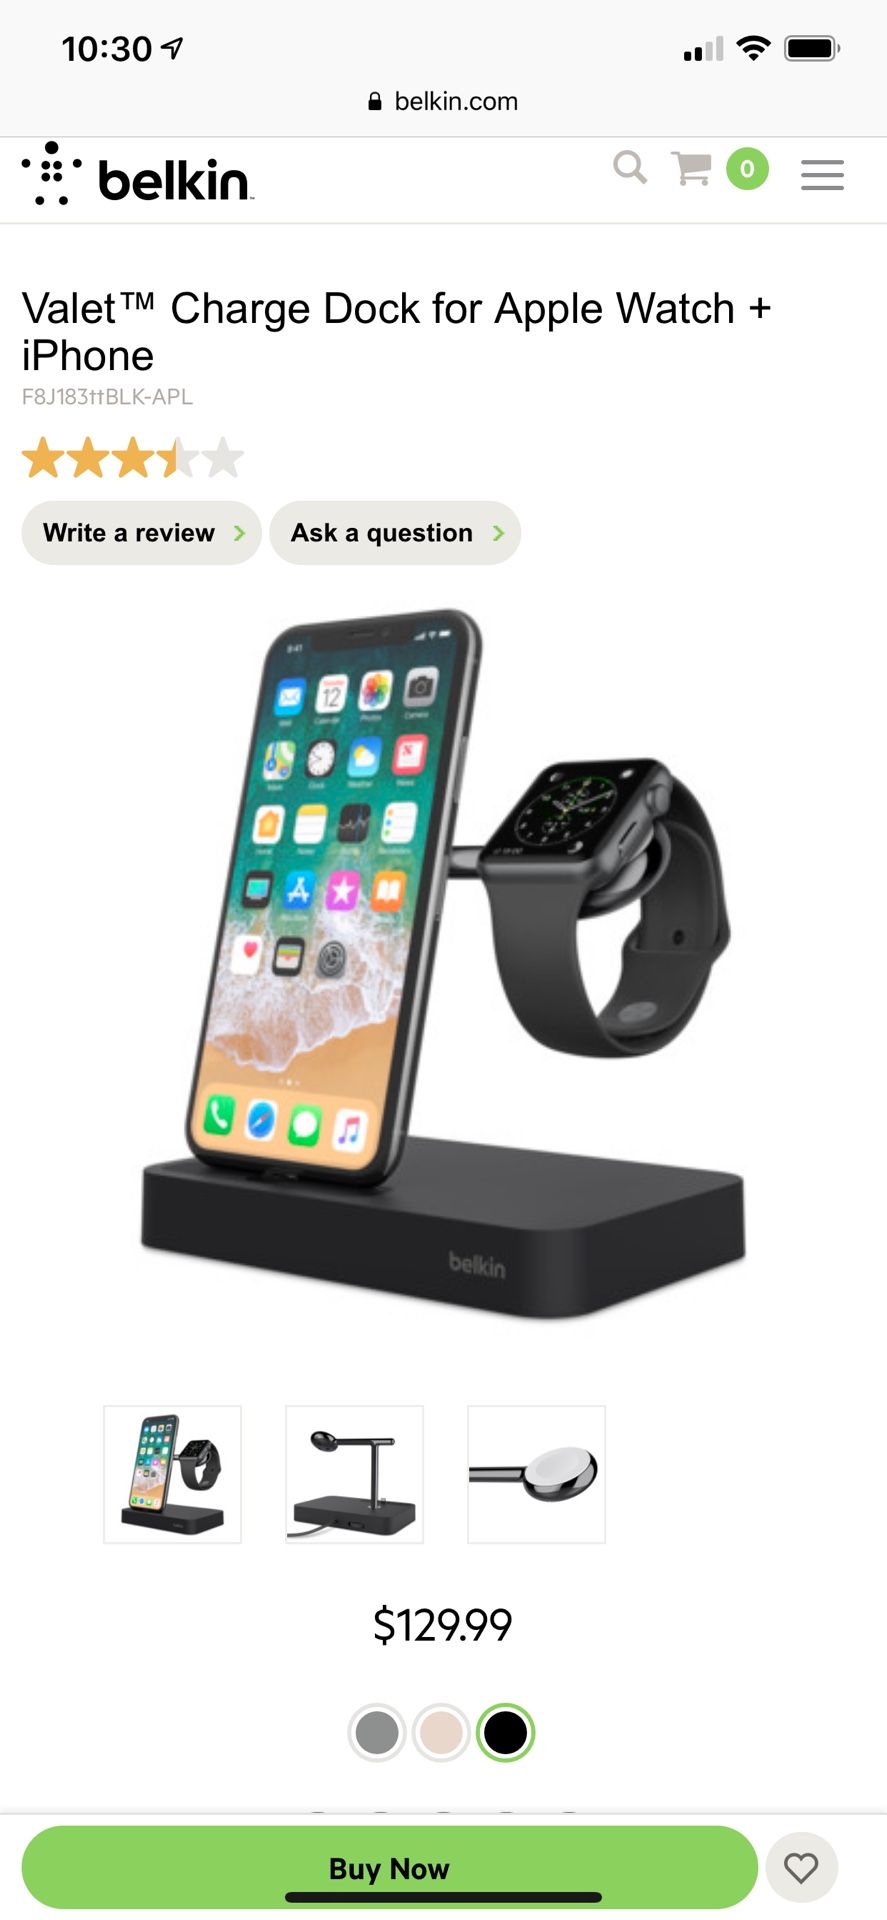 Belkin Valet Iphone and Apple Watch Charge Dock